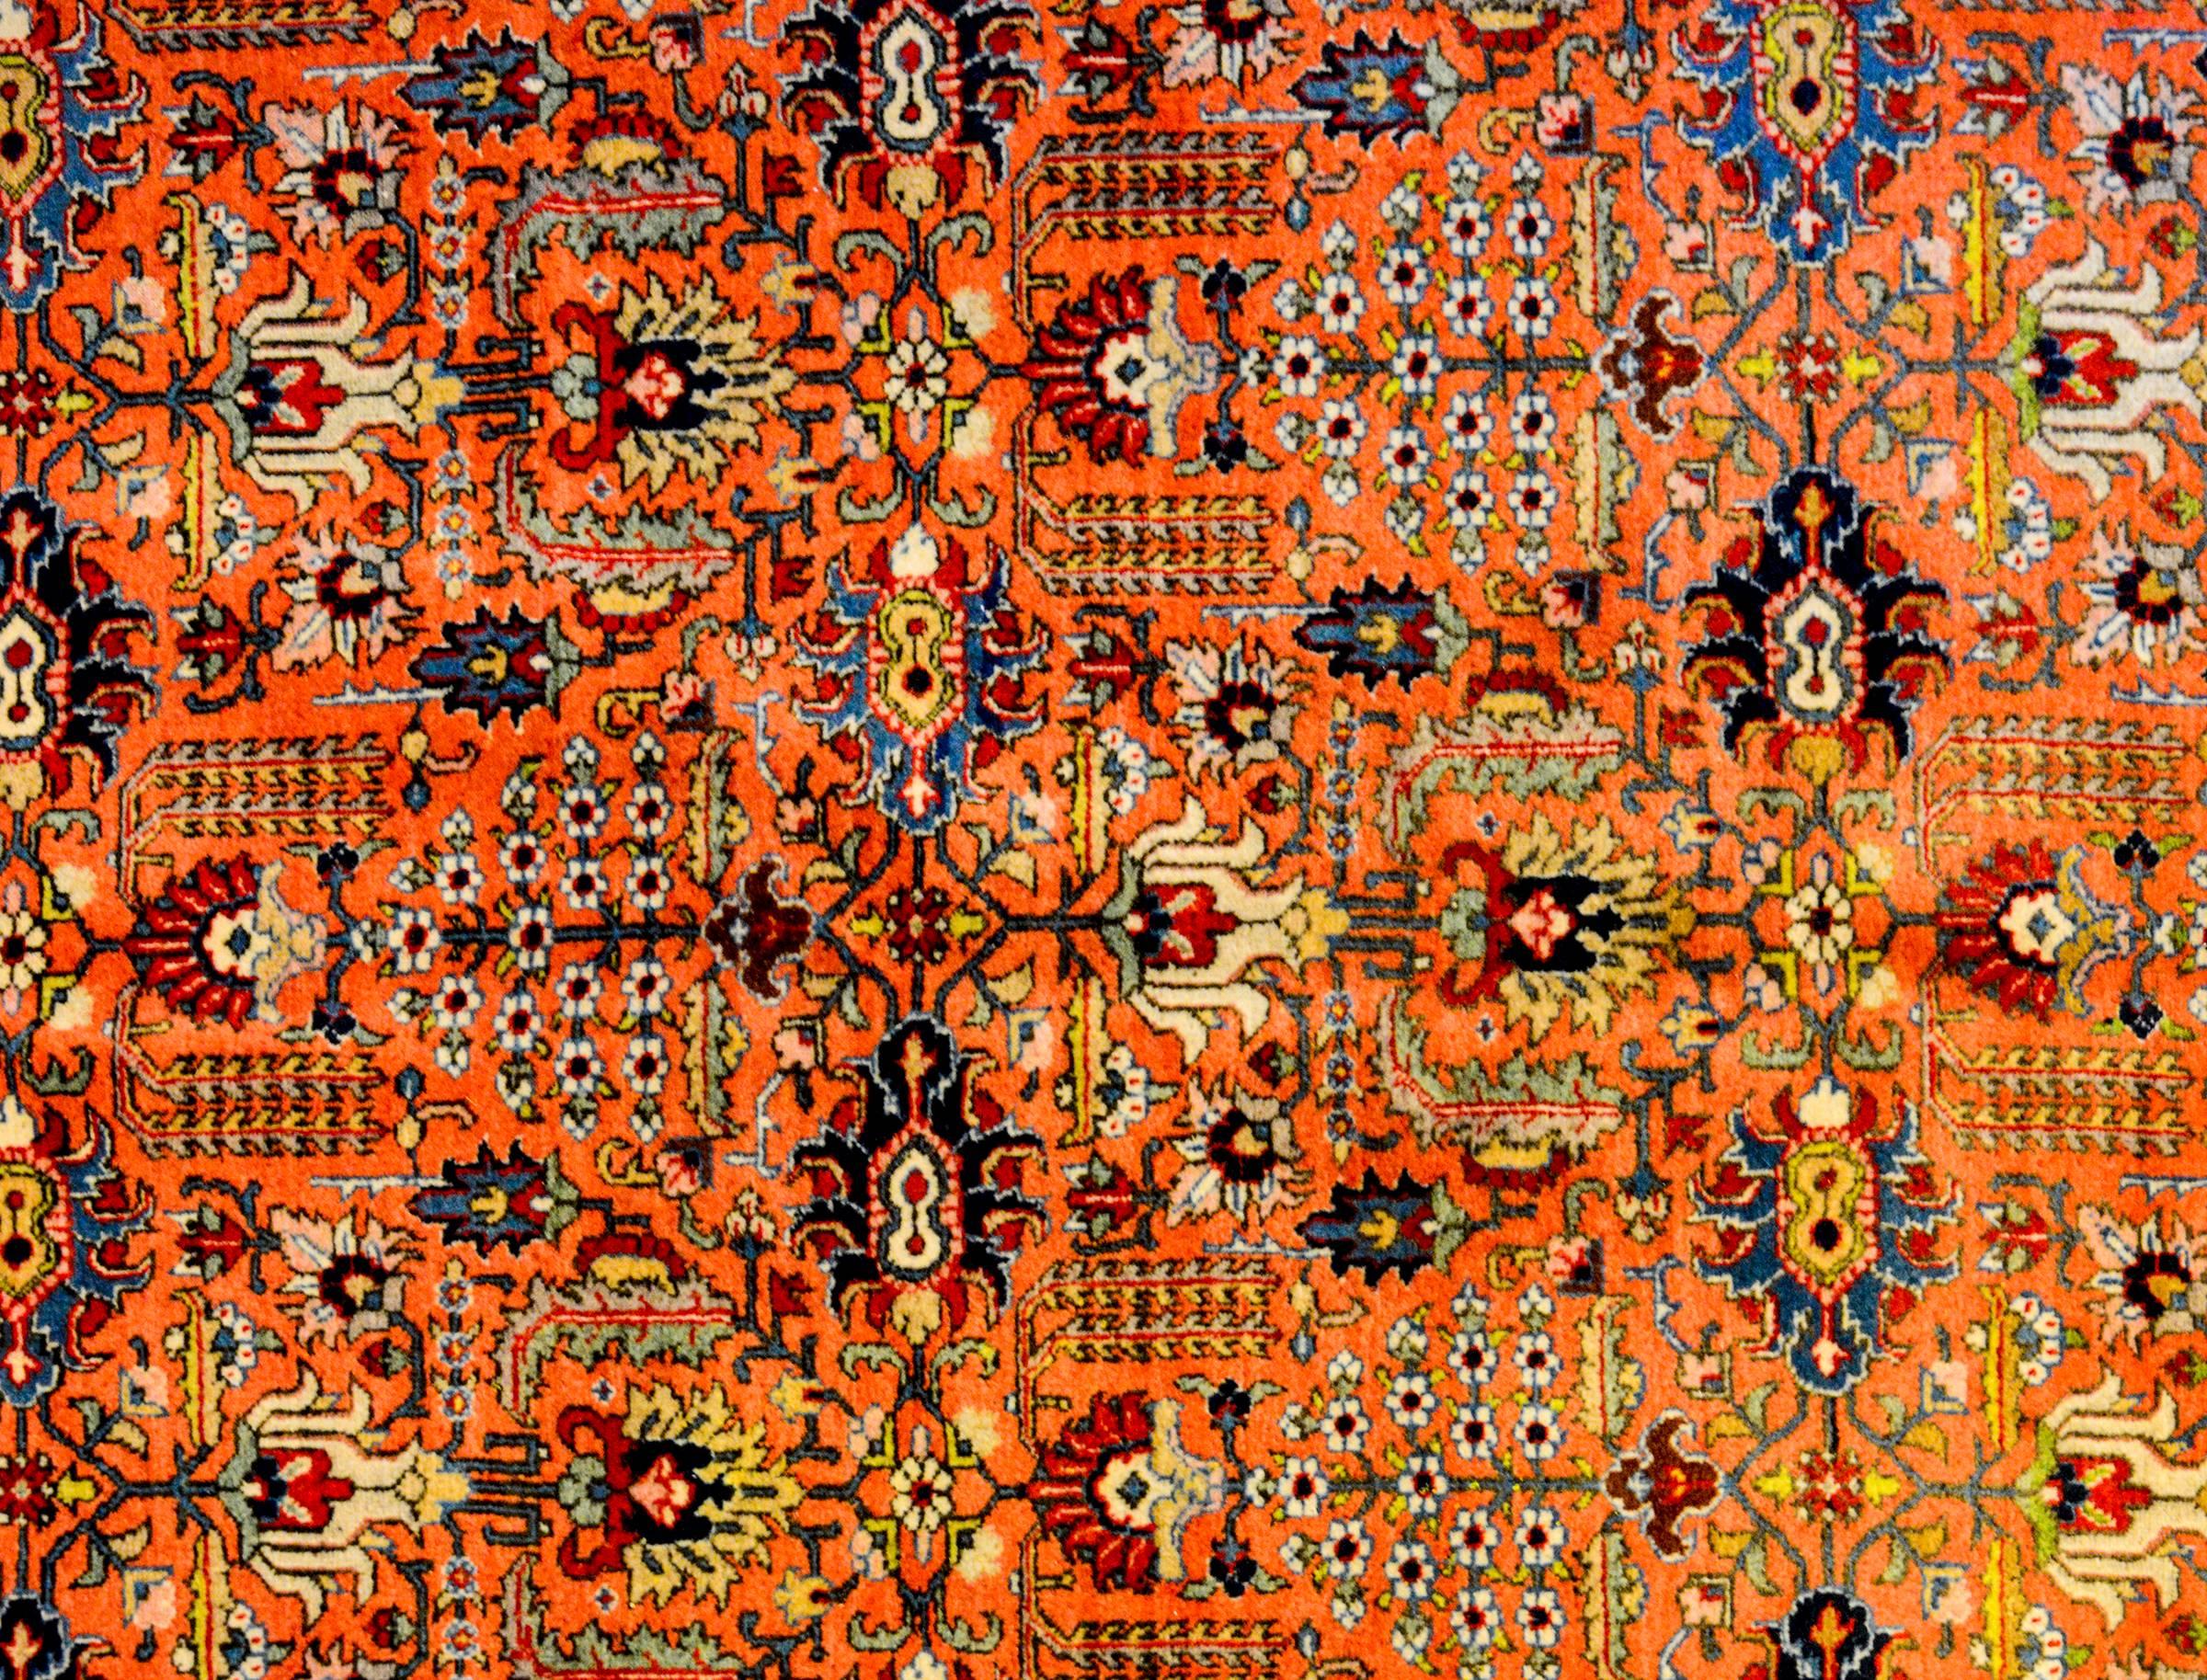 A wonderful early 20th century Persian Tabriz rug with an all-over mirrored floral pattern woven in crimson, indigo, gold and green, on an amazing flame-orange background. The border is exceptional with a large-scale multicolored floral and leaf